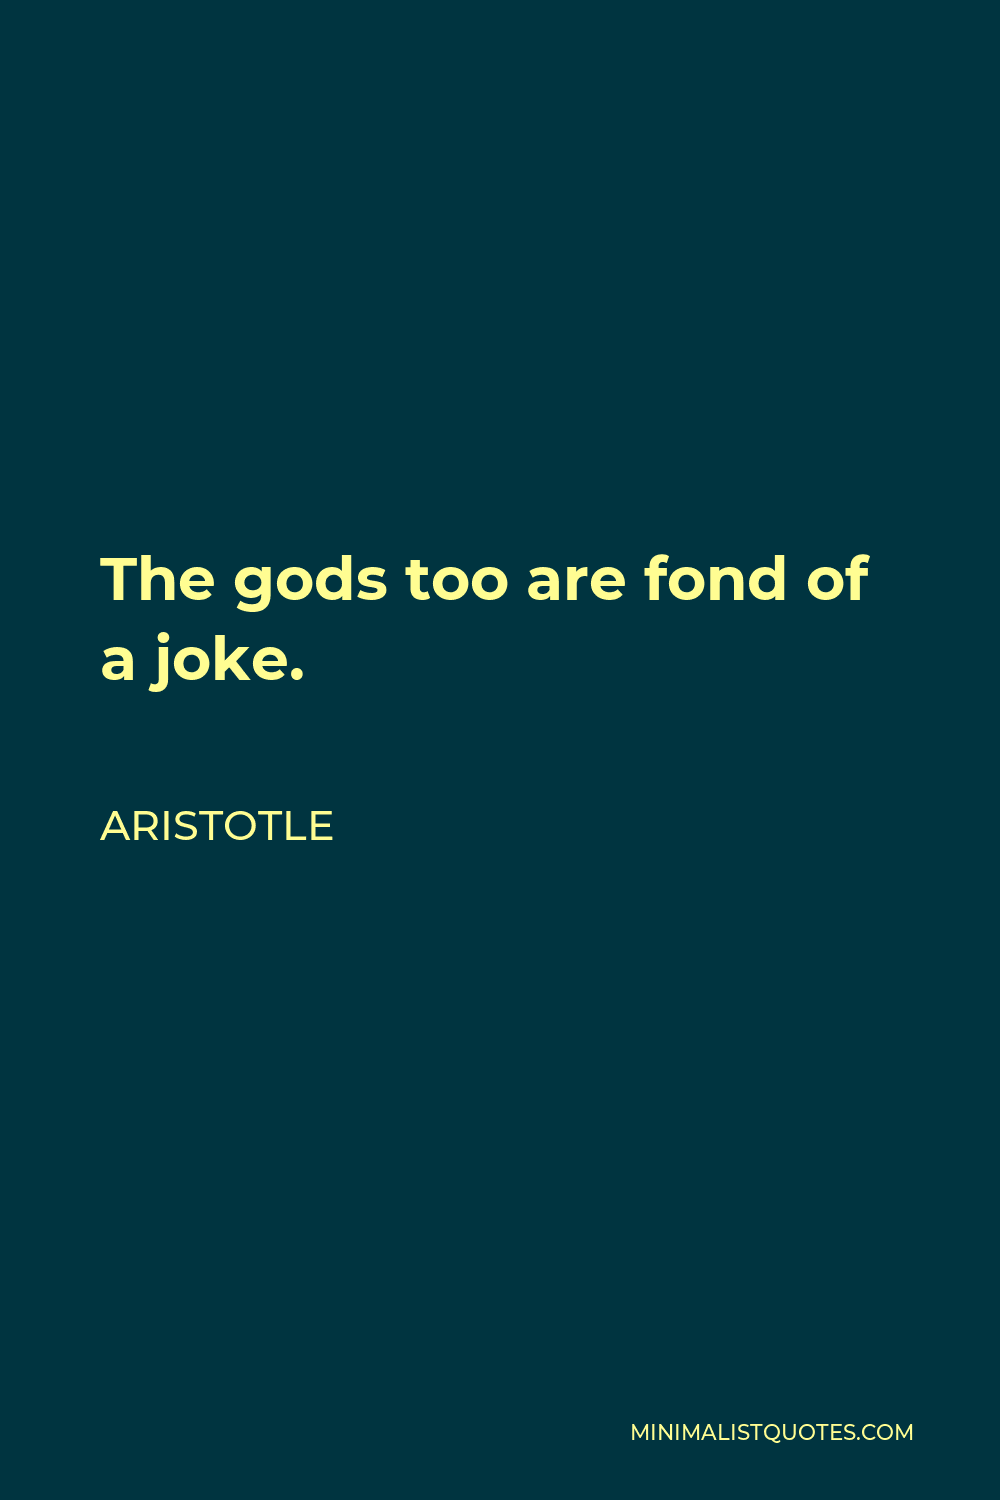 Aristotle Quote - The gods too are fond of a joke.